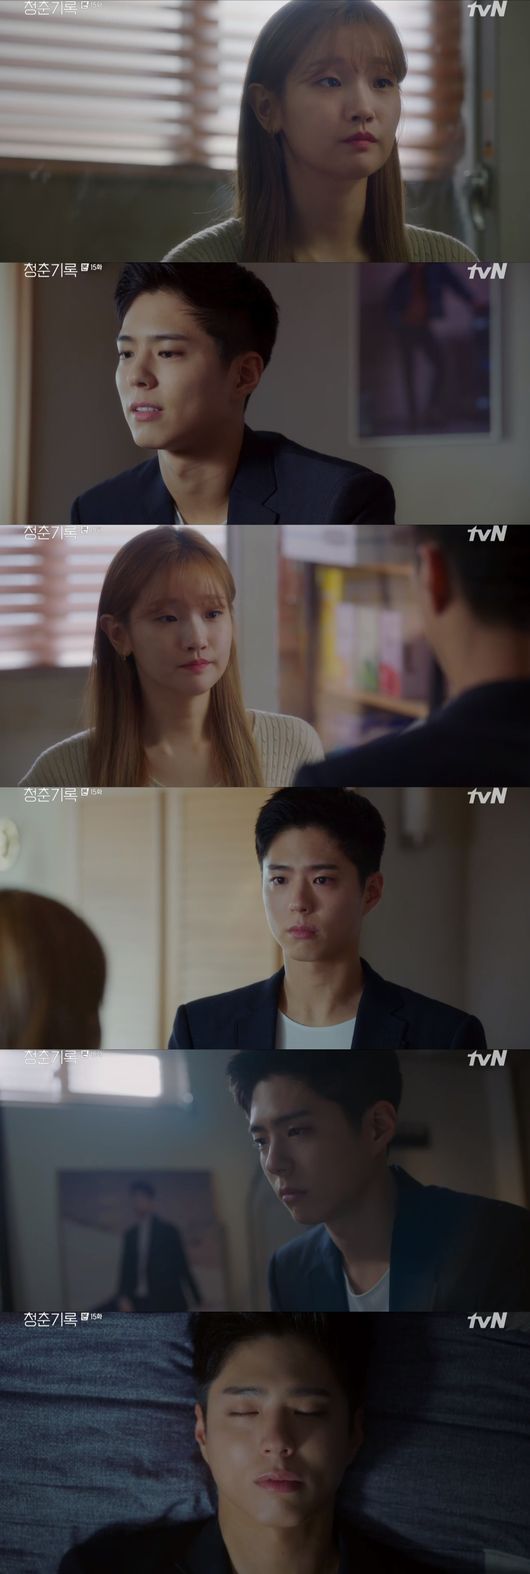 Park Bo-gum gets farewell notice to Park So-damIn TVN Mon-Tue drama Record of Youth broadcast on the 26th, Park So-dam informed Sa Hye-joon of his farewell.For Kim Soo-man (Bae Yoon-kyung), who is stable earlier, Sa Hye-joon showed a line on the romance rumor, saying, It is just a customer.Sa Hye-joon was worried about the wound that An Jeong-ha would have received when he saw the romance rumor rebuttal article.I received a call from Sa Hye-joon, who was stable, and Sa Hye-joon asked me to go to the house of Ahn Hye-ha. However, my mother said that she was coming to a stable house.I will go to your house for a few days, said An Jeong-has mother. I went to a hair shop without going to a good company.A smart guy like you cant just quit the company. Take some signs. Signs can take it.I work together, but I will not do it. What would you imagine with those Signs? On that day, Samingi (Han Jin-hee) received a contract offer from the model institute, but Samingi said, I will go with my son, and Sa Yeong-nam (Park Soo-young) decided to become the manager of his father, Samingi.Sa Hye-joon texted An Jeong-ha and asked her, My mother wants to eat dinner. My mother is gone. She said, Thank you for the invitation to eat.Sa Hye-joon prepared a picture on his shoes for An Jeong-ha.The next morning, Sa Hye-joon told An Jeong-ha, Go outside. But An Jeong-has mother first confirmed the shoe gift that Sa Hye-joon left behind.I will not break up with empty hands even if I break up. My mother is still vulgar, he said.If you hear that your mother is vulgar to your child, the Horribly Slow Murderer with the Extremely is not it?Anyway, the Horribly Slow Murderer with the Extremely, so lets end with The Horribly Slow Murderer with the Extremely. On the other hand, on this day, Sa Hye-joon was struggling because of the articles and all kinds of scandals that the drama ratings were falling because of himself.I want to rest a little after this, Sa Hye-joon told Lee Min-jae (Shin Dong-mi) I will not do the next thing.The manager said to Sa Hye-joon, My brother seems to be a steel mental. So, Sa Hye-joon said, I cry every night. I cry every night, so I can cry during the day.However, on this day, Sa Hye-joon was informed of his separation from Ahn Jung-ha and poured tears alone. In the end, Sa Hye-joon went to Ahn Jung-ha and said, I can not break up with you.: TVN Mon-Tue drama Record of Youth broadcast capture